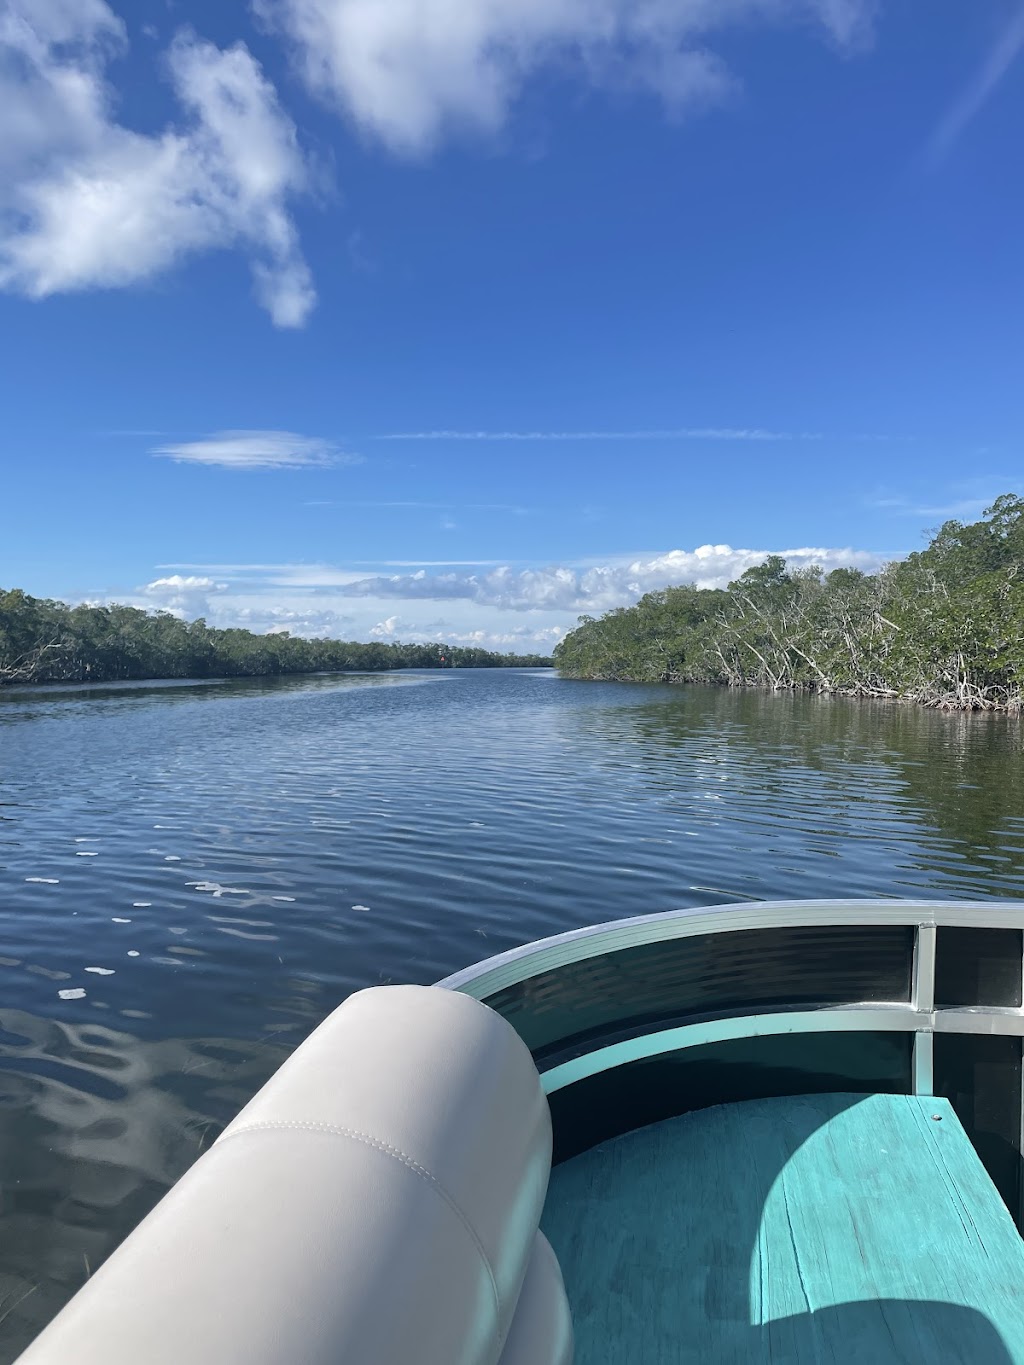 Capt. Sterlings Everglades Tour | Dolphins Plus, 101900 Overseas Hwy, Key Largo, FL 33037, USA | Phone: (305) 394-7422